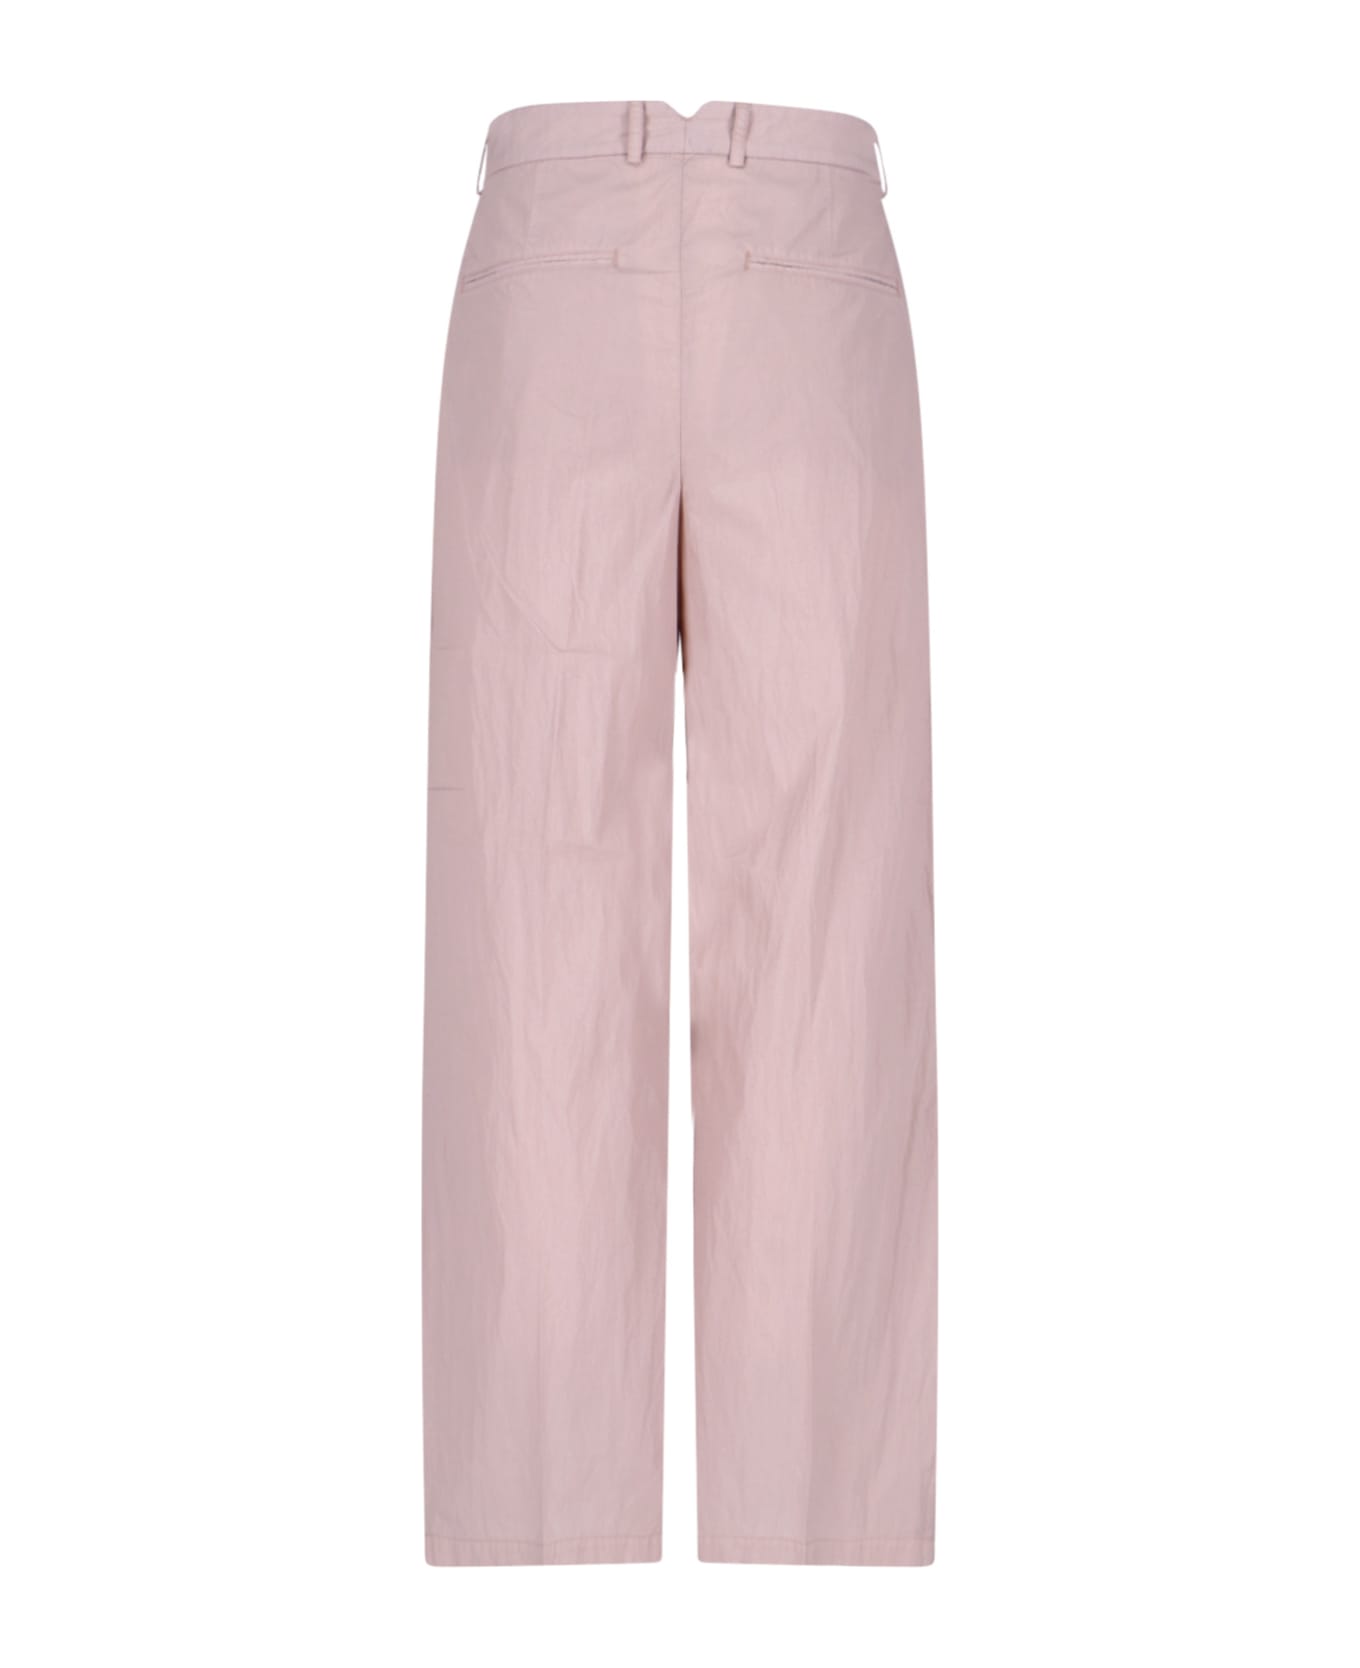 Our Legacy 'cheerful' Pants - Pink ボトムス